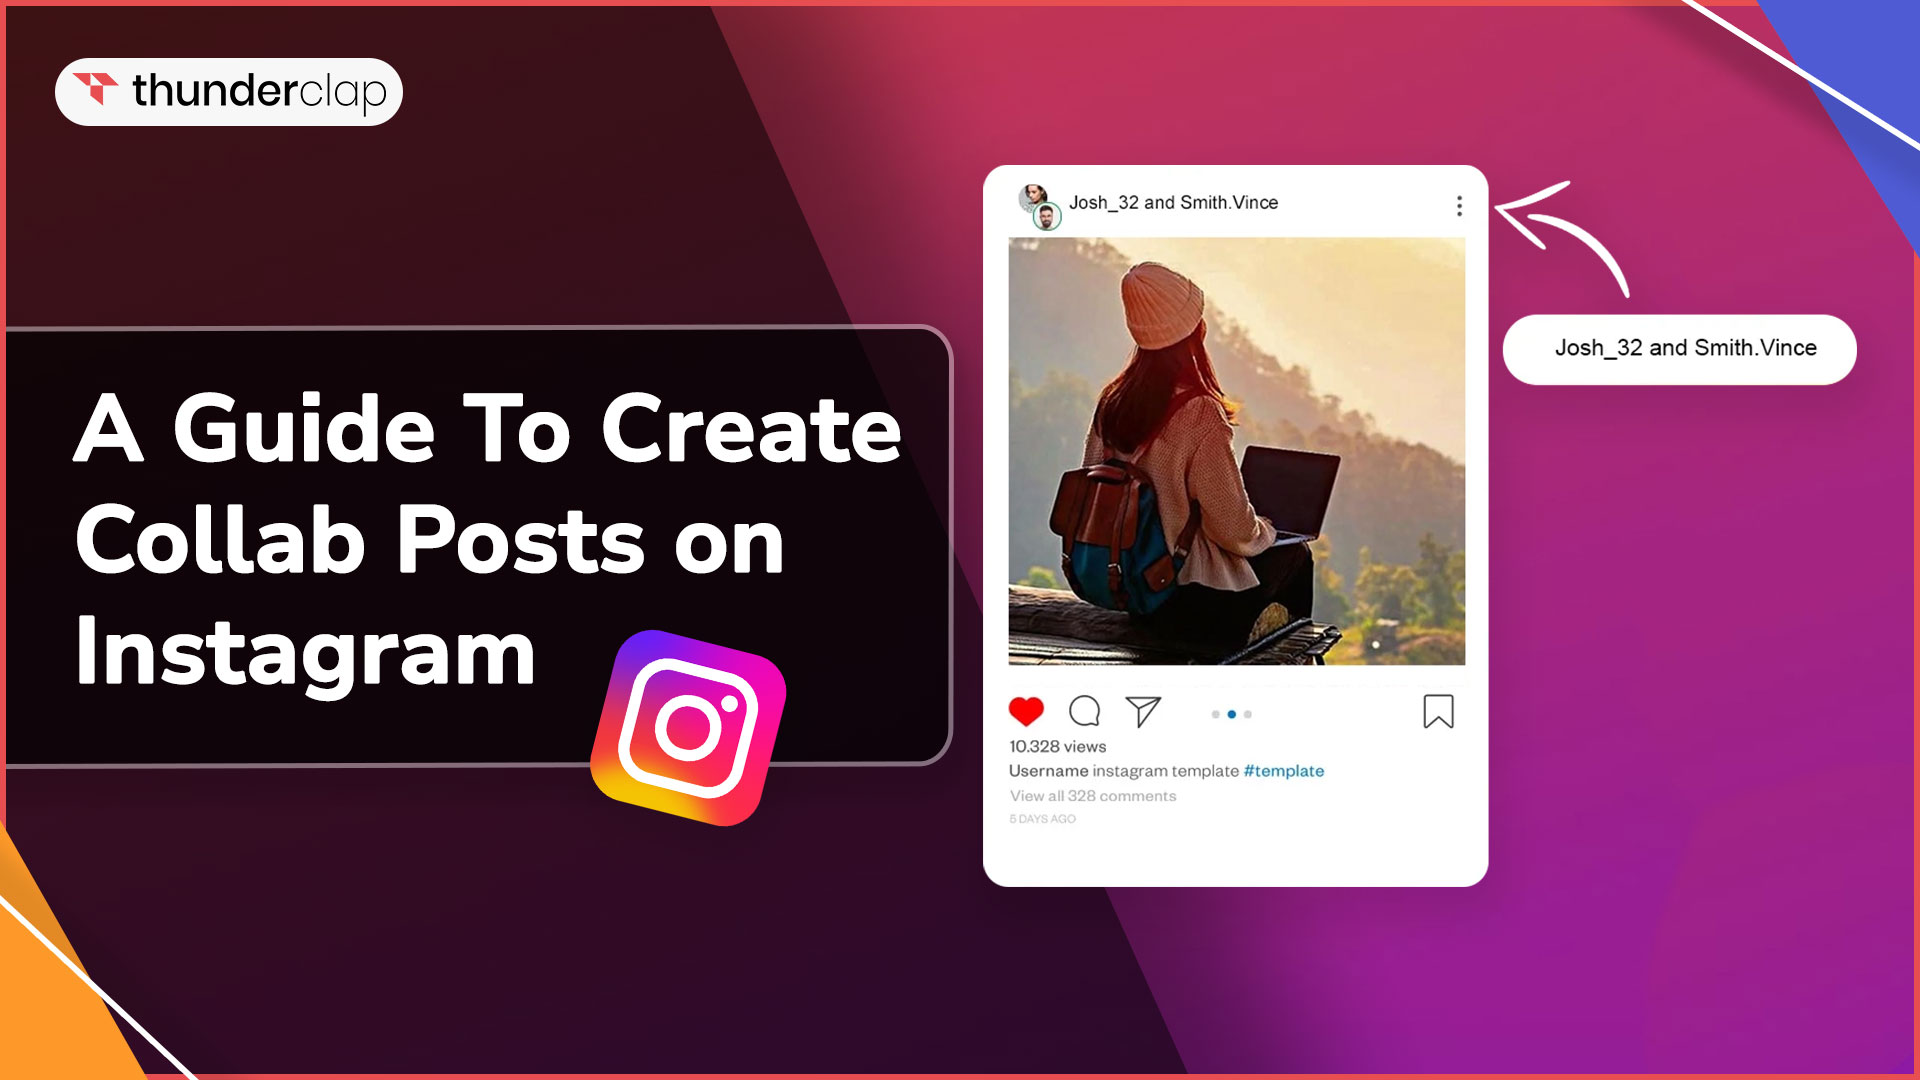 A Guide To Create Collab Posts on Instagram